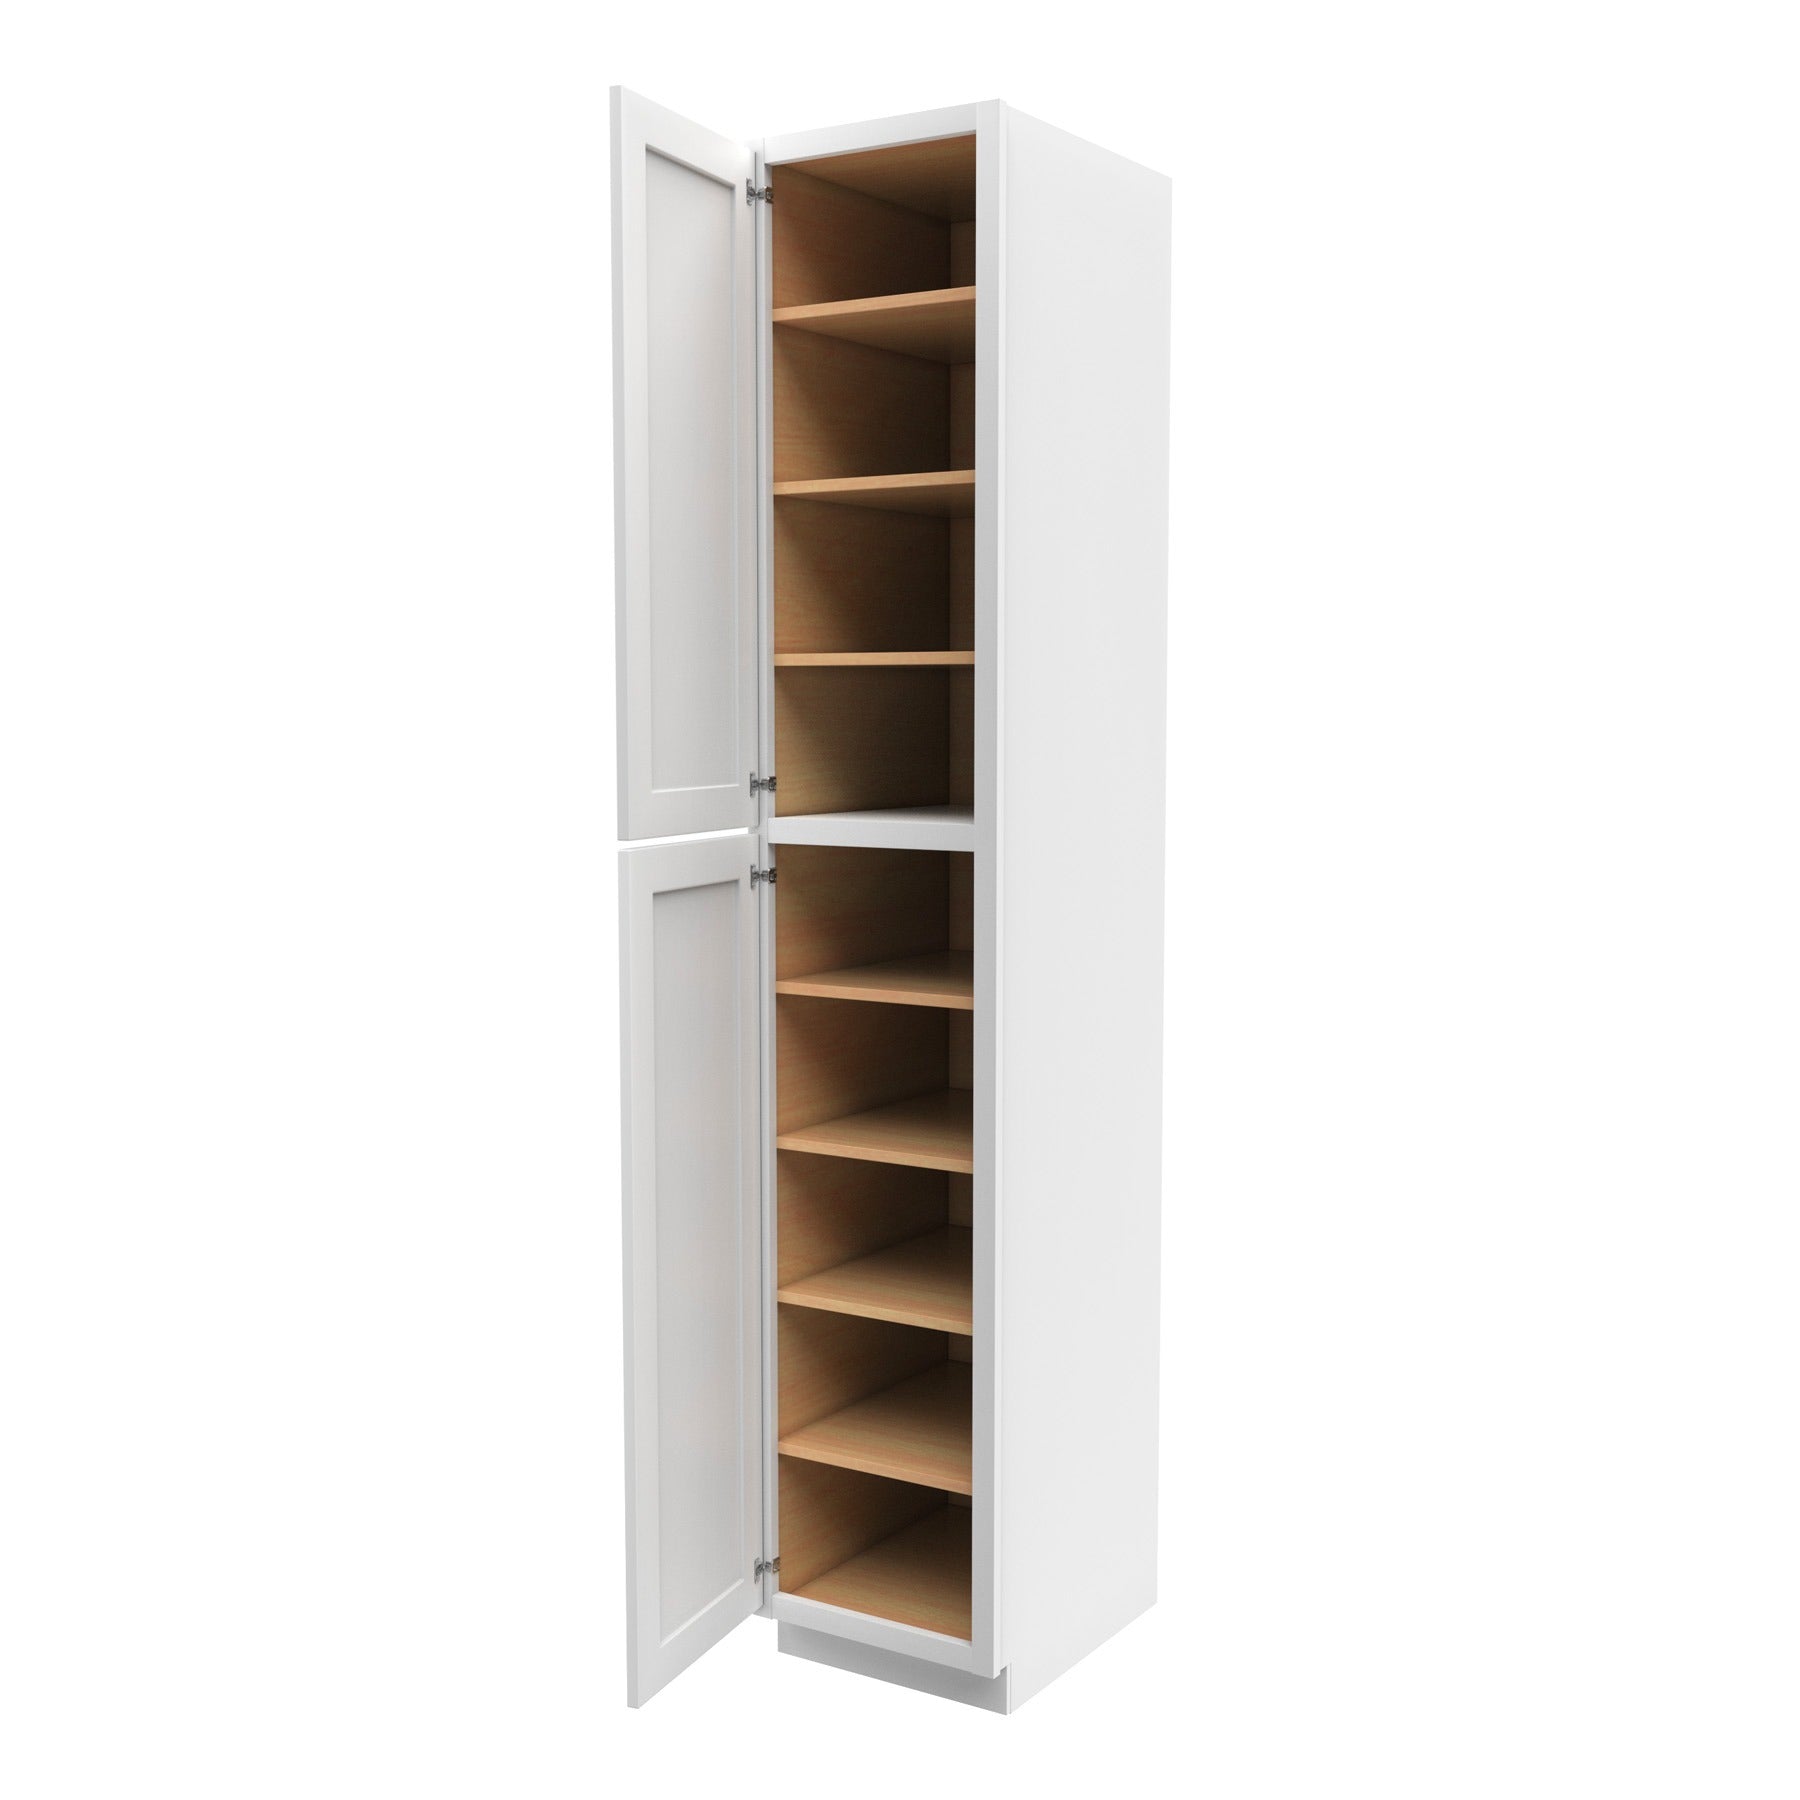 96 Inch High Single Door Tall Cabinet - Luxor White Shaker - Ready To